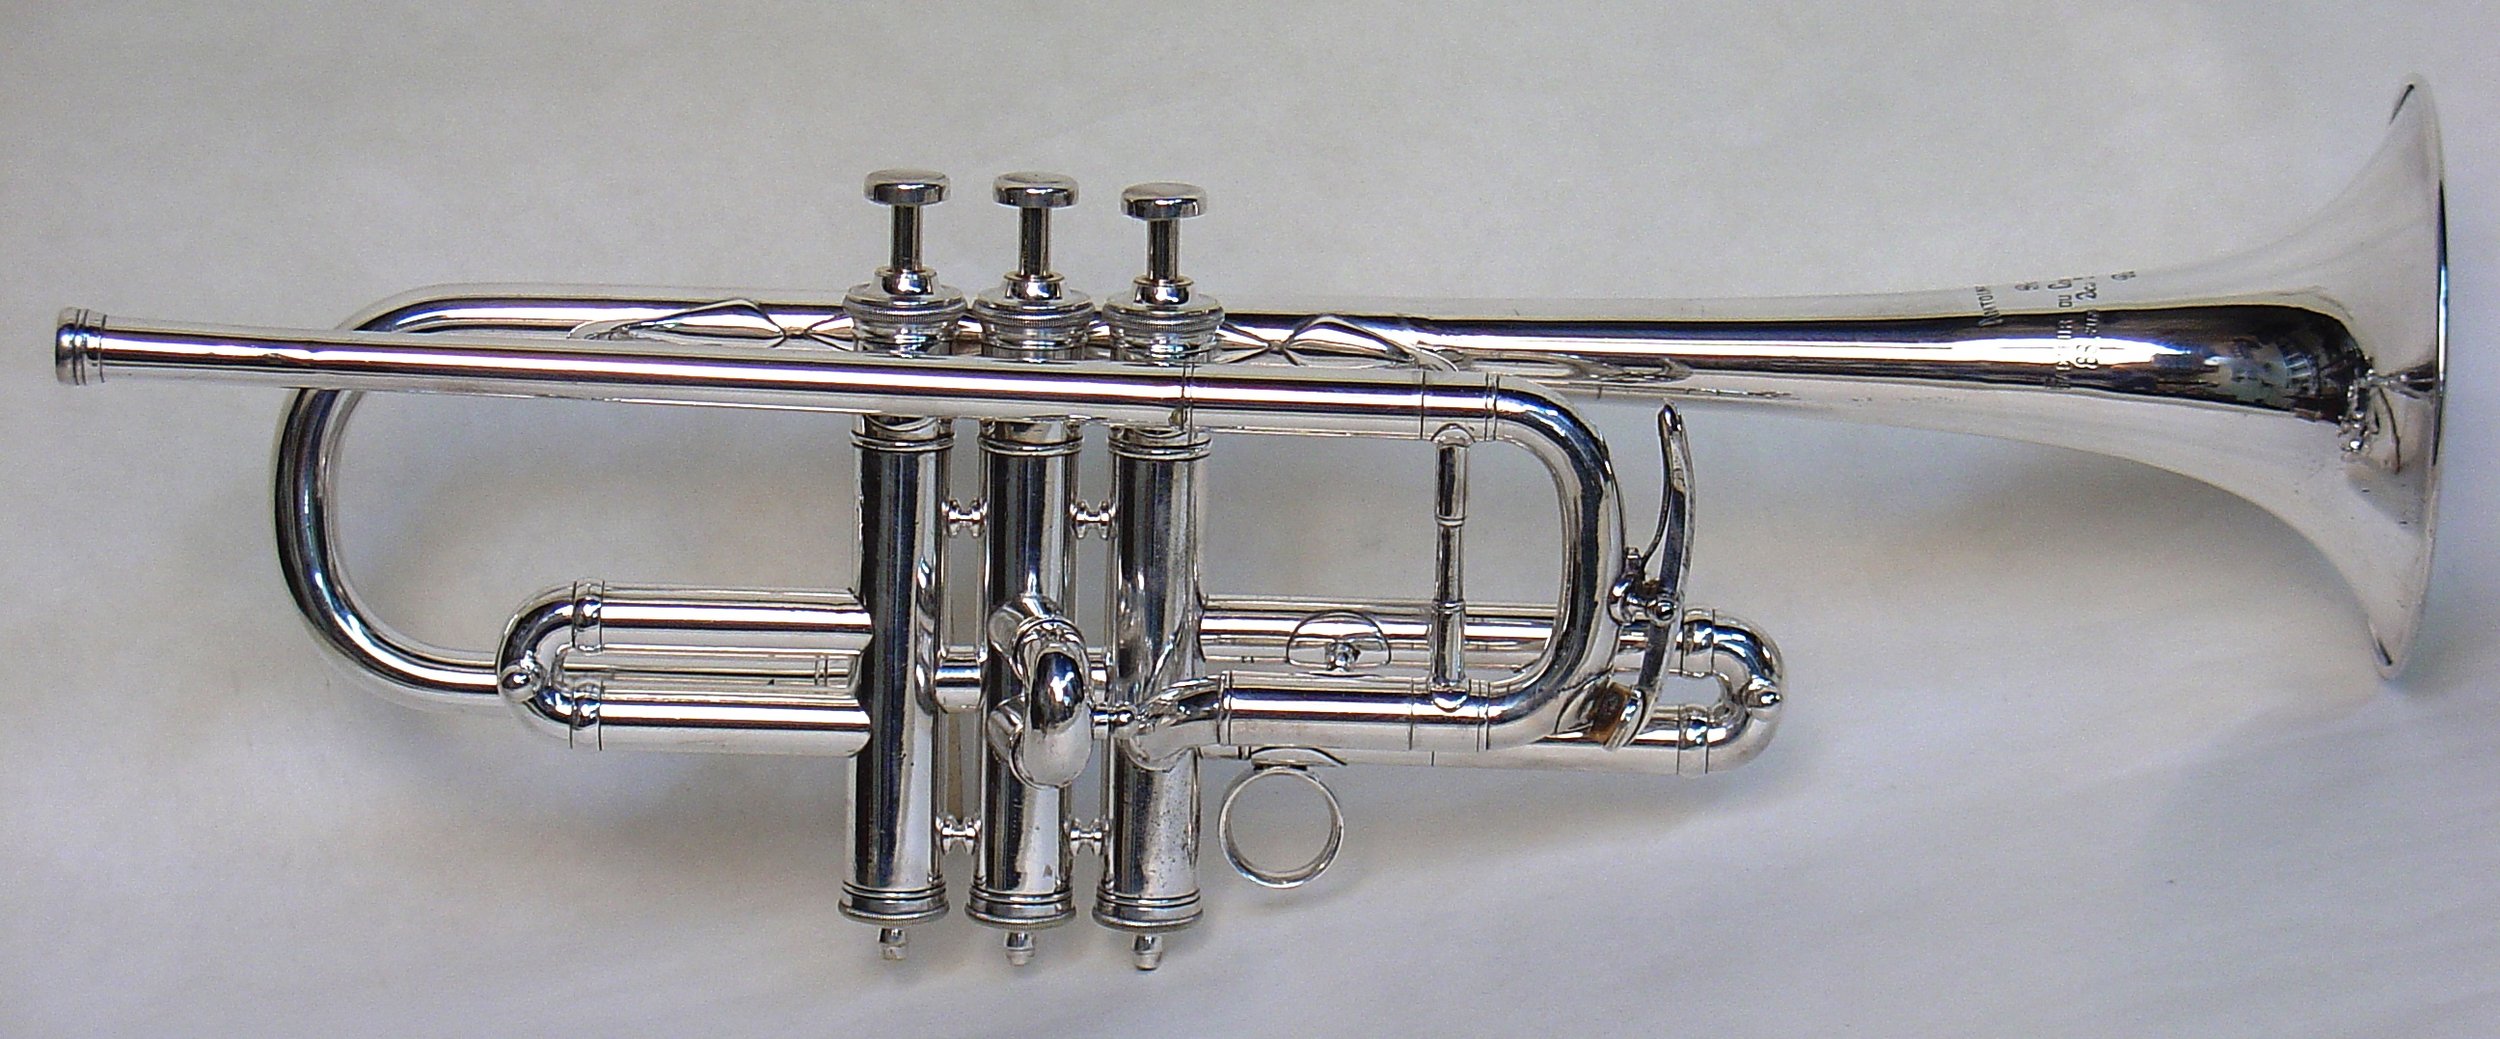 Georges Mager's Courtois D Trumpet